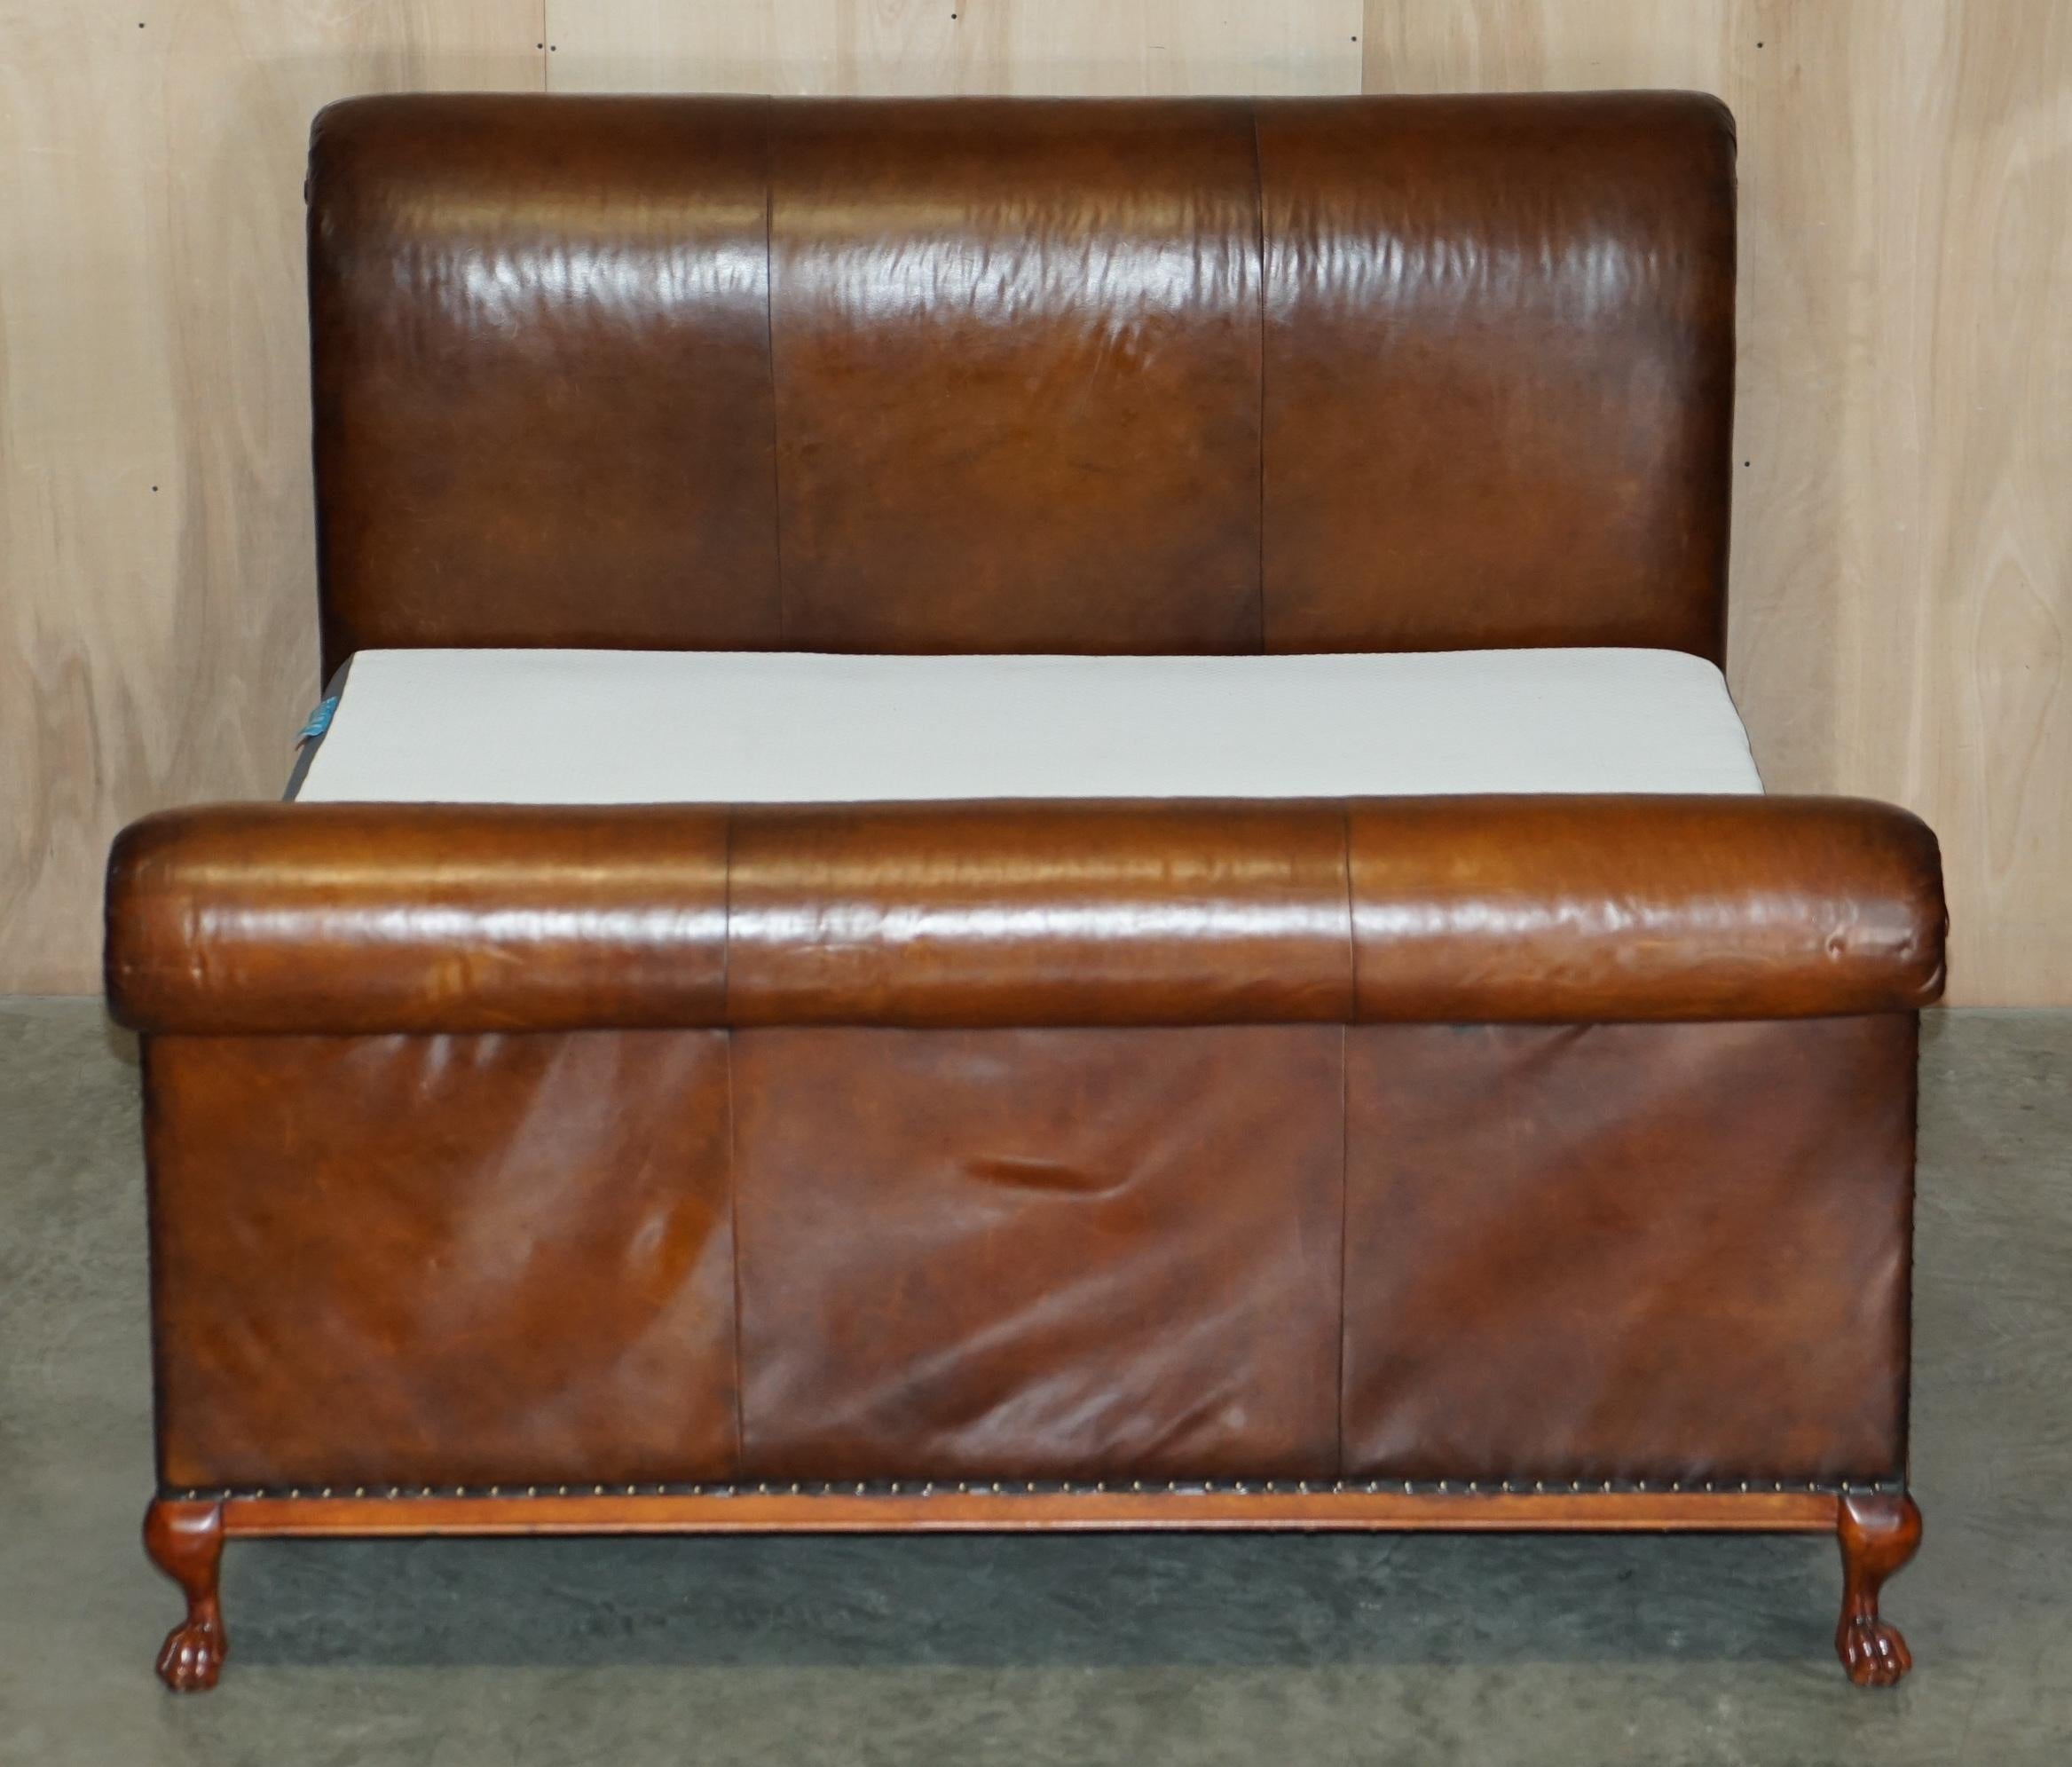 We are delighted to offer for sale this lovely handmade in England, RRP £18,000, Ralph Lauren And So To Bed Bonaparte, hand dyed brown leather Emperor sized bed frame.

A very good looking, extremely comfortable and well-made bed, this was